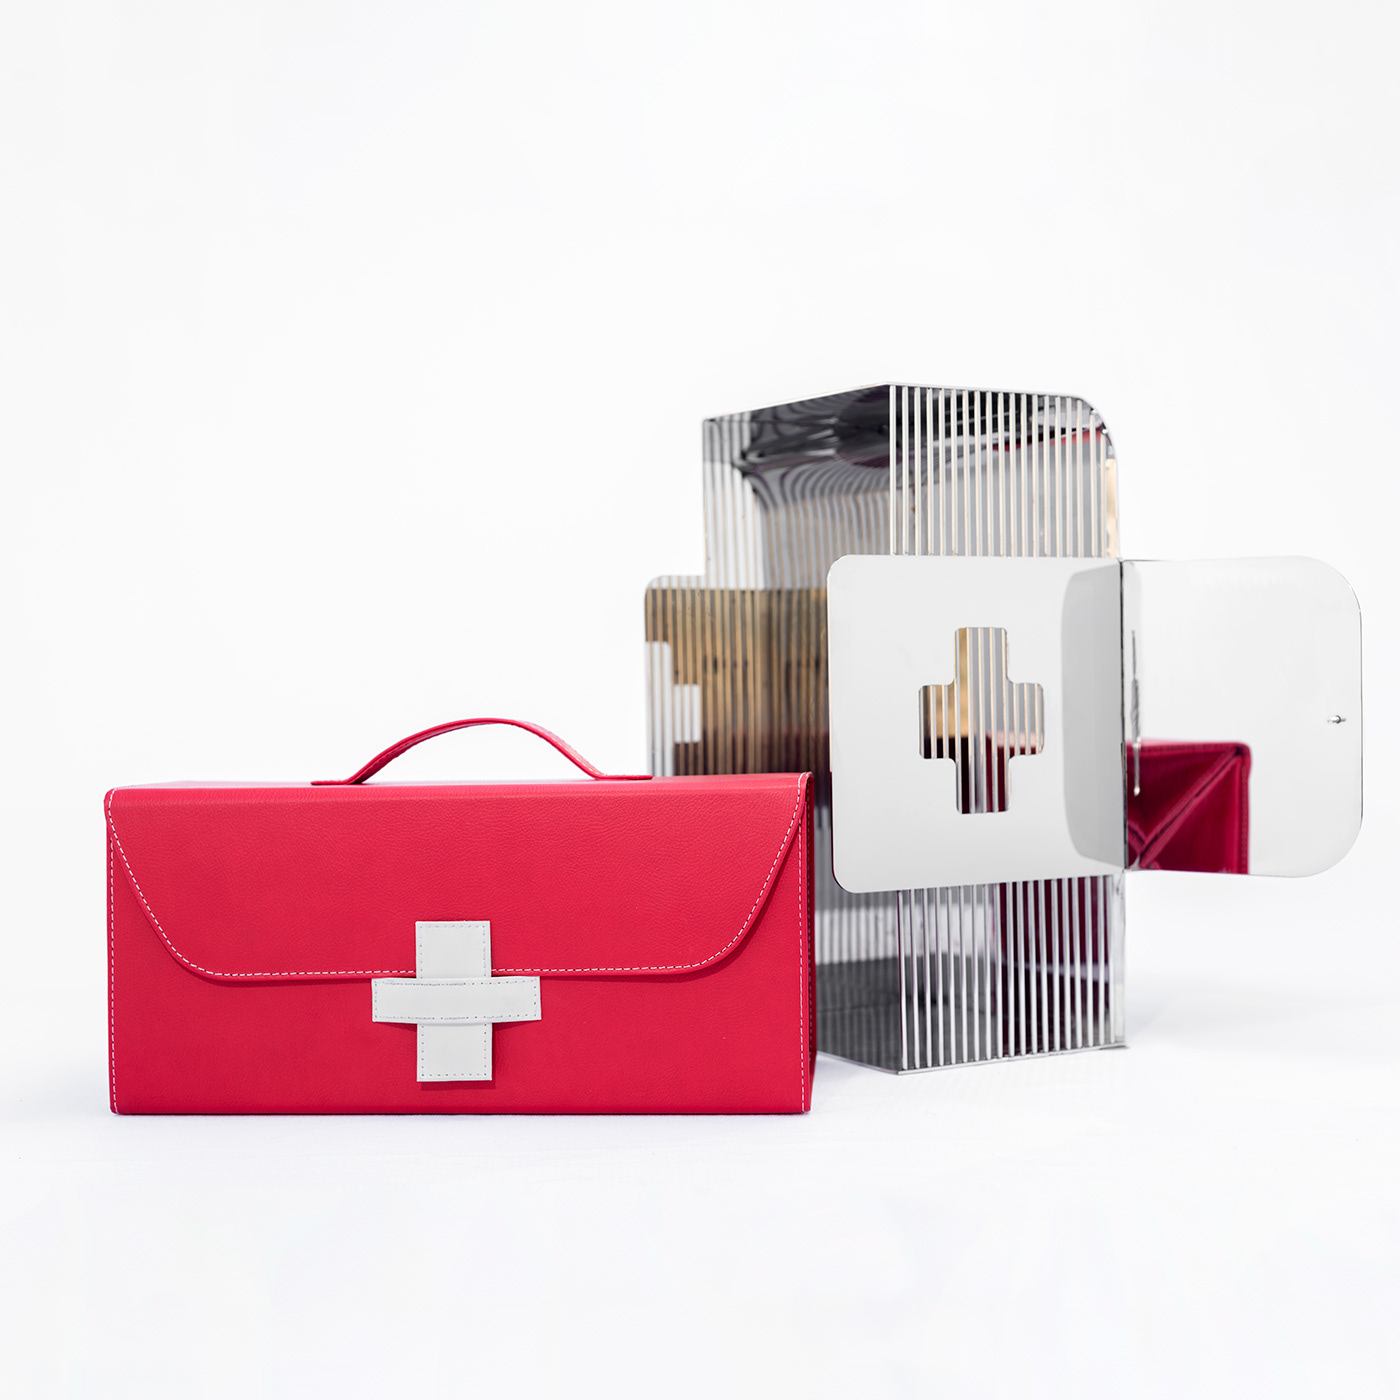 design designer emergency equipment first aid kit folding industrial design  photoshoot product design  Product Photography